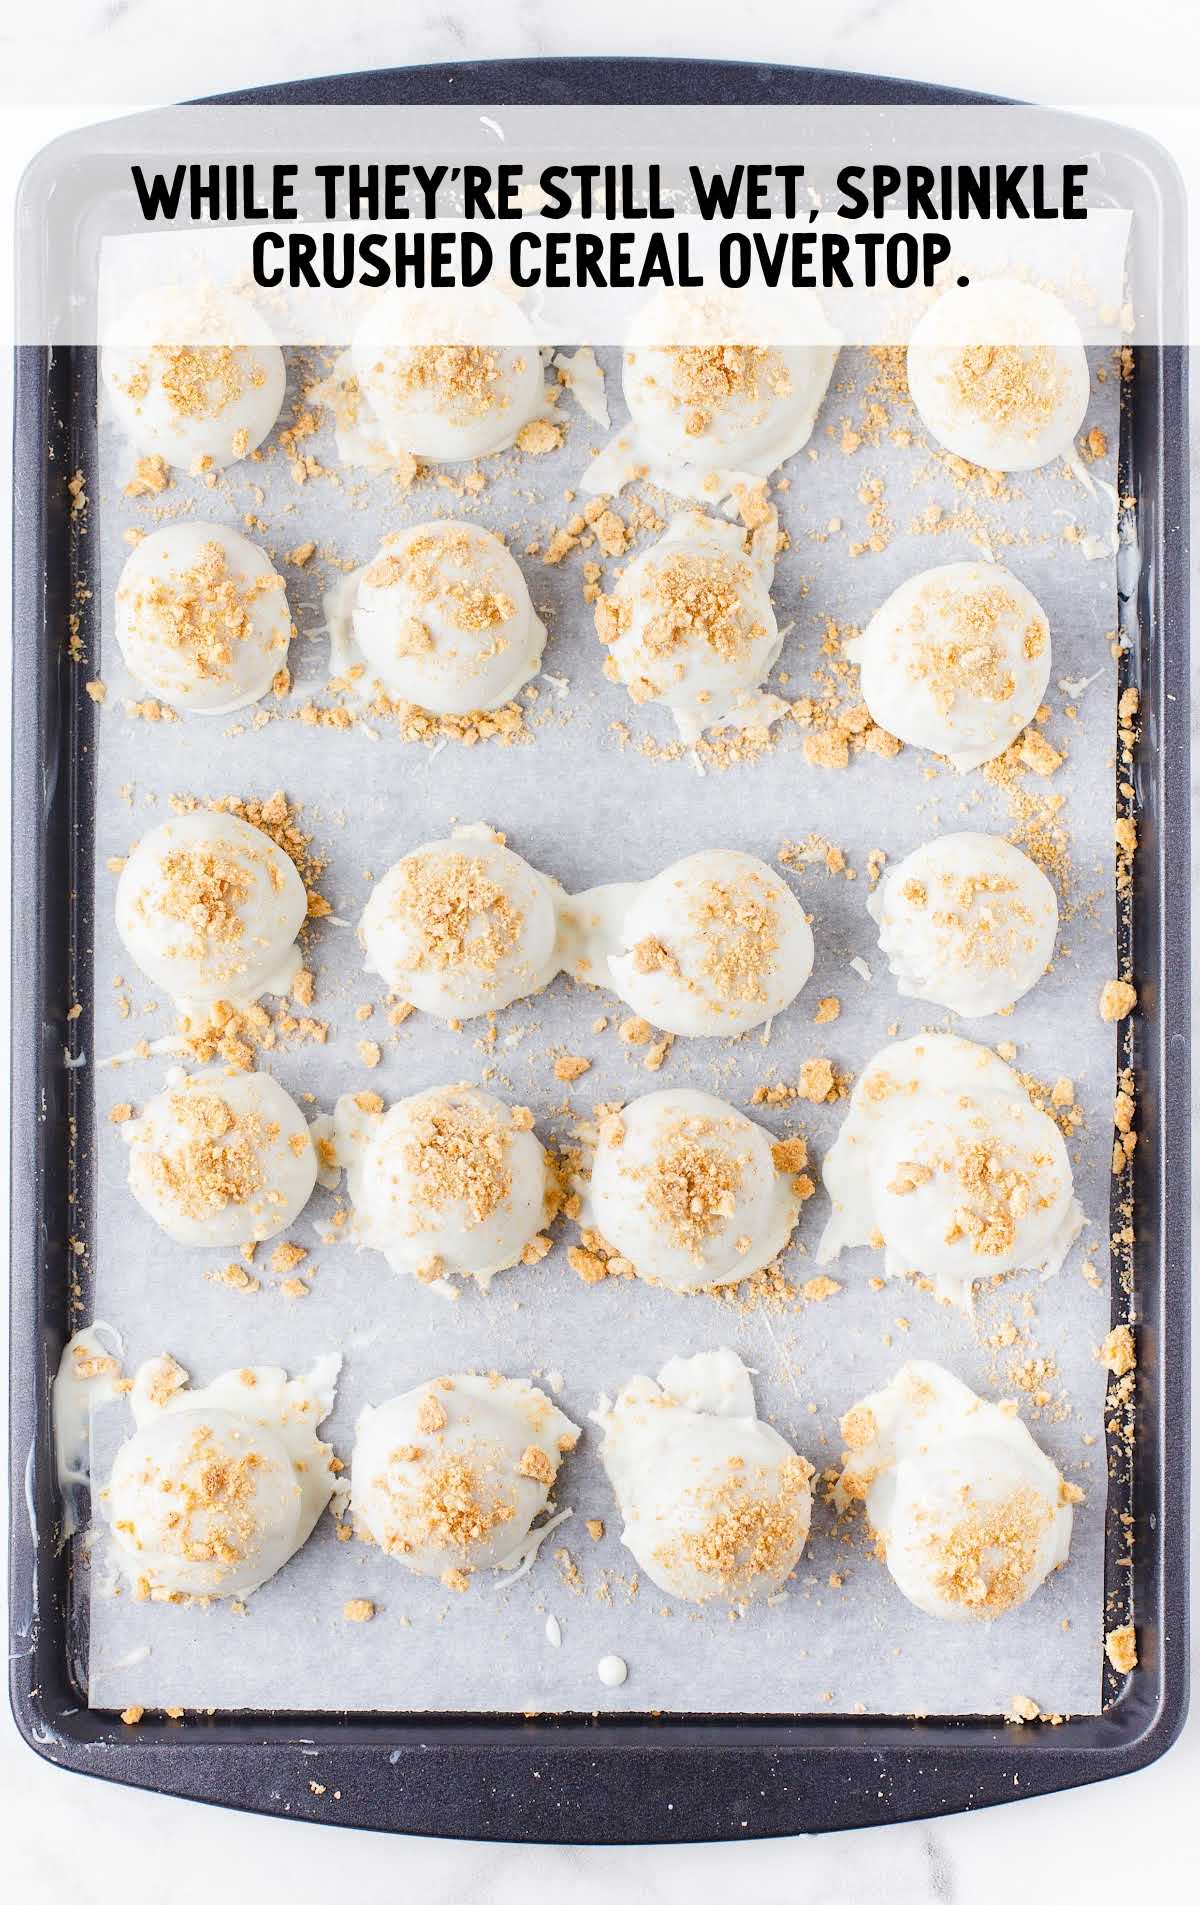 crushed cereal sprinkled over the top of the cheesecake bites on a baking sheet